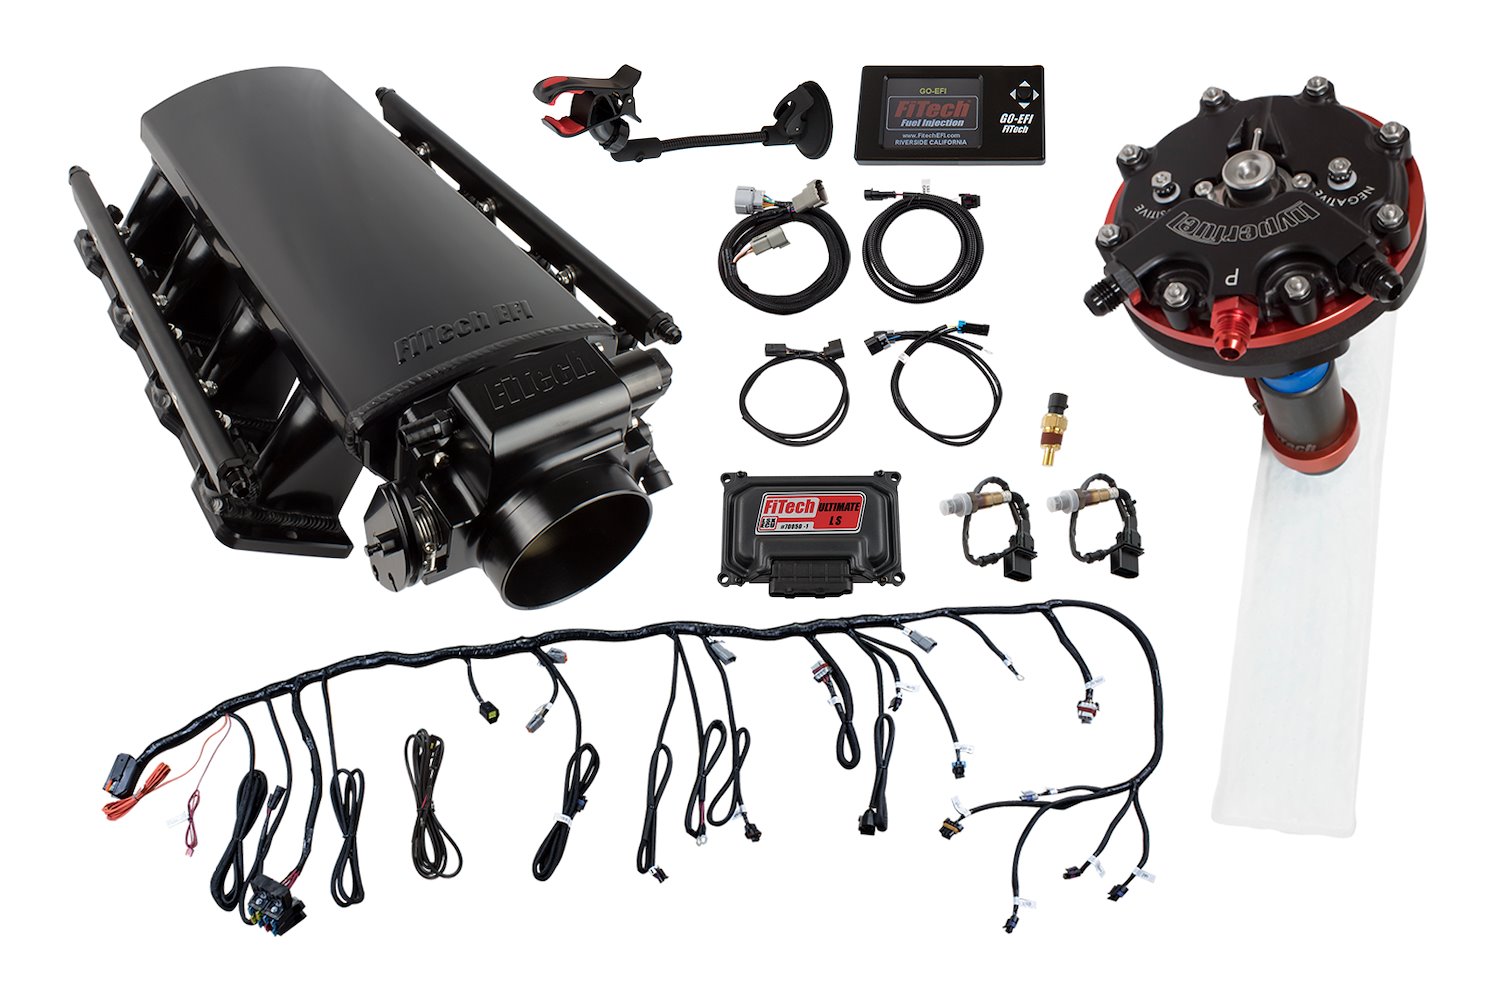 Ultimate LS EFI Induction System LS3/L92 750 HP with Hy-Fuel Single Pump Regulated In-Tank Retrofit Kit